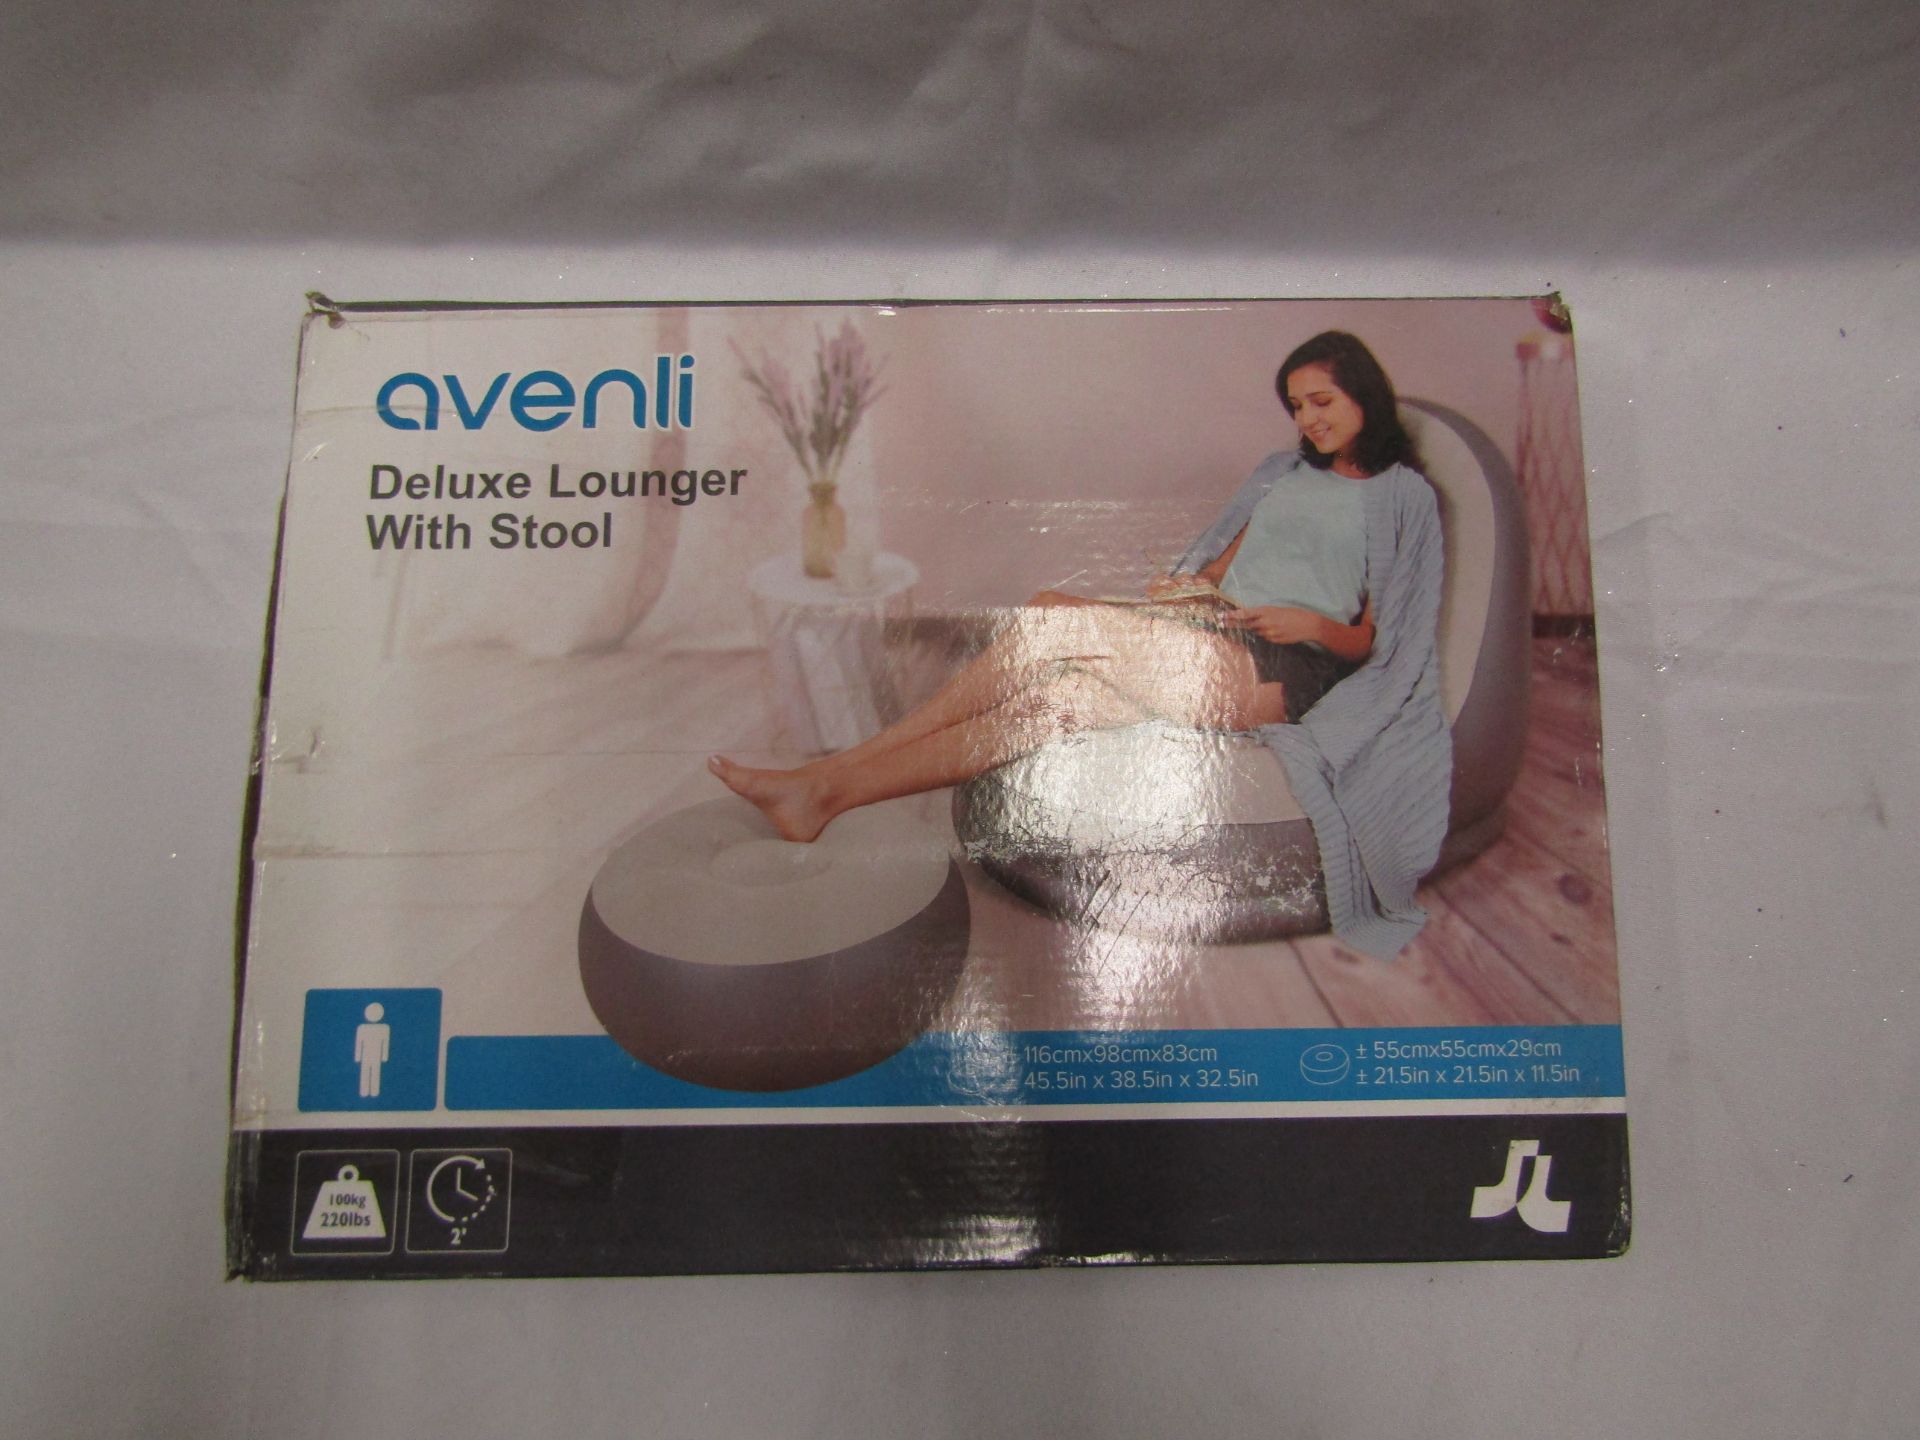 1 x Avenol Deluke Lounger With Stool packaged unchecked